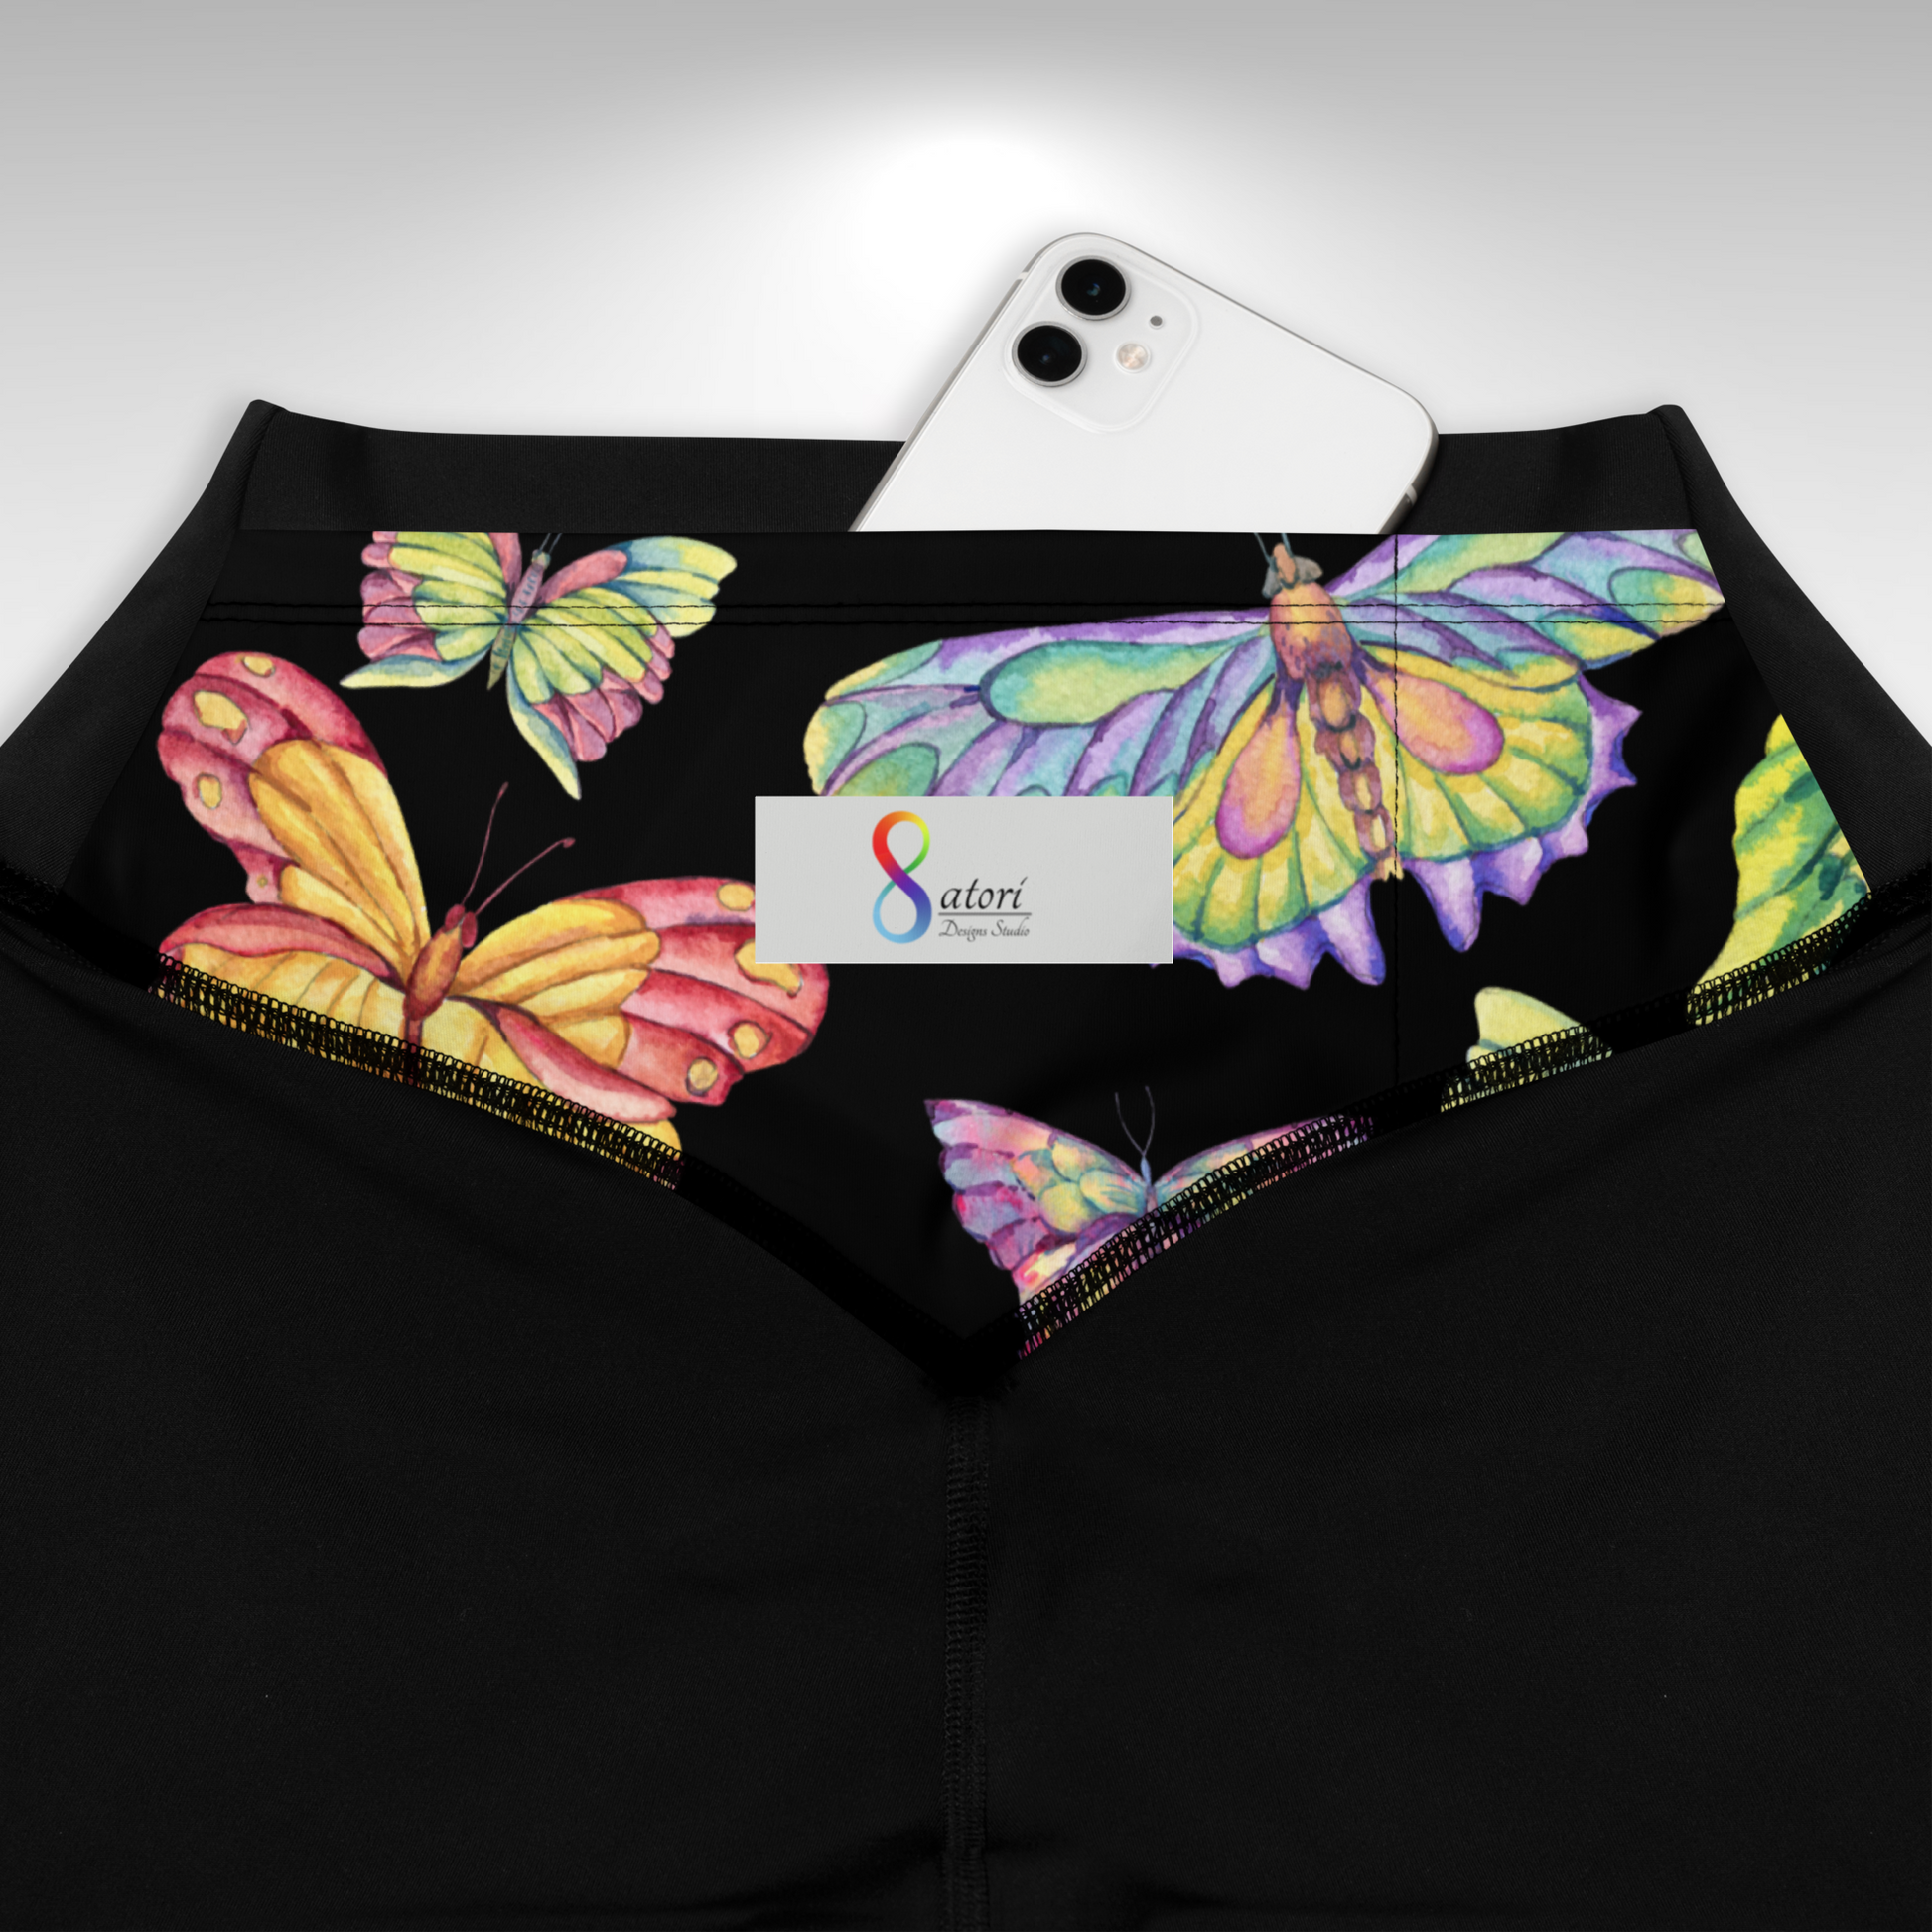 Women Compression Legging - Colourful Butterfly Print